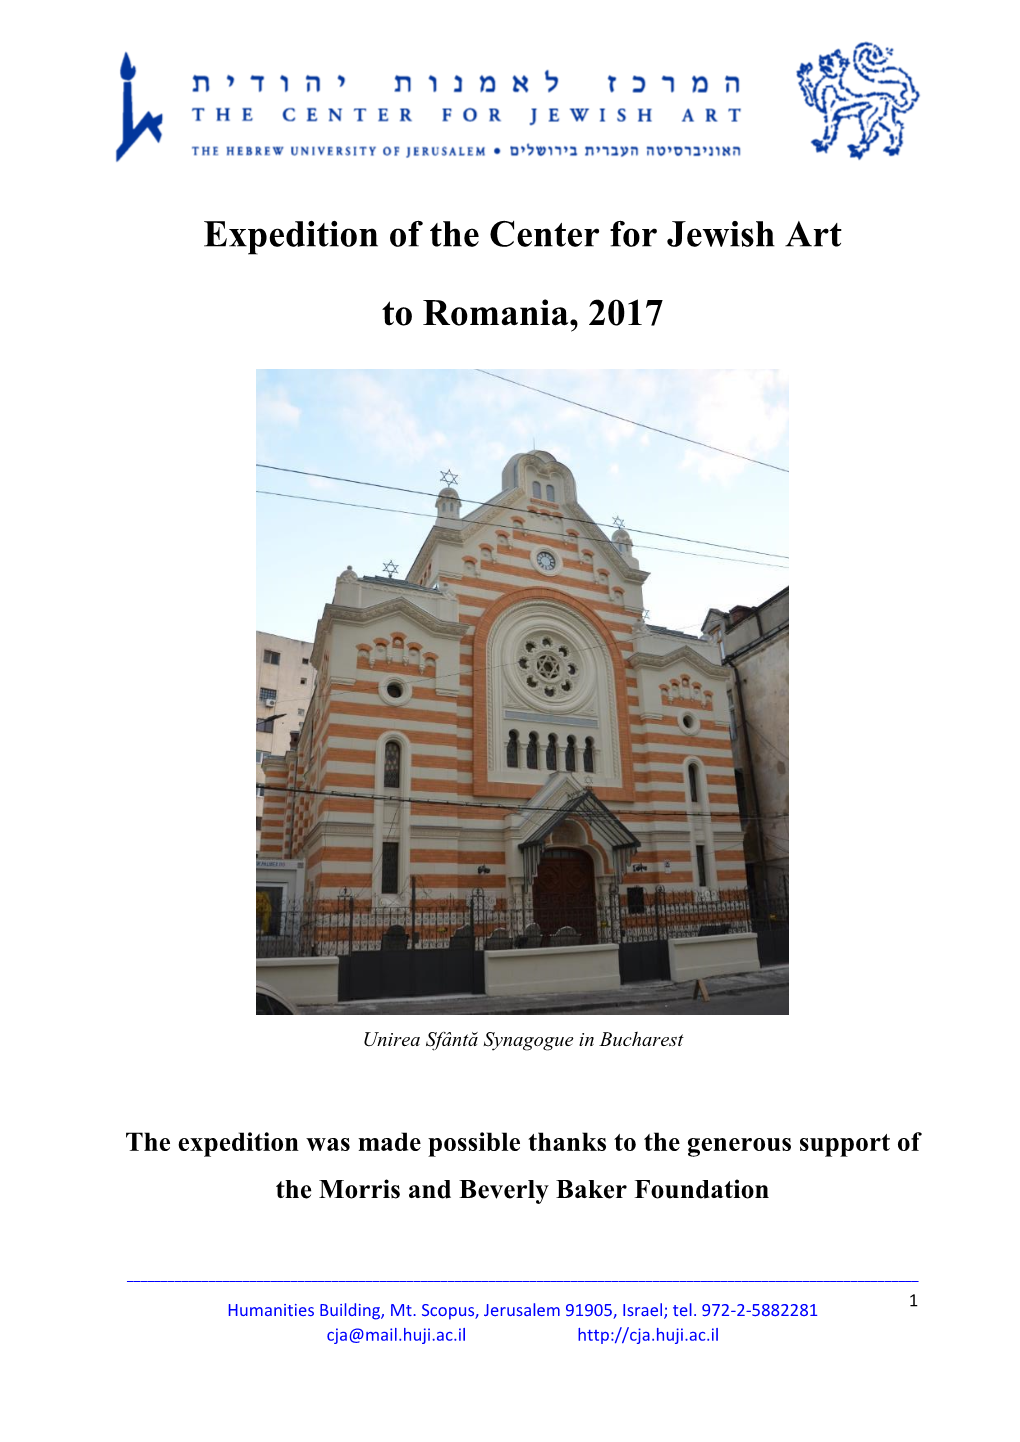 Expedition of the Center for Jewish Art to Romania, 2017